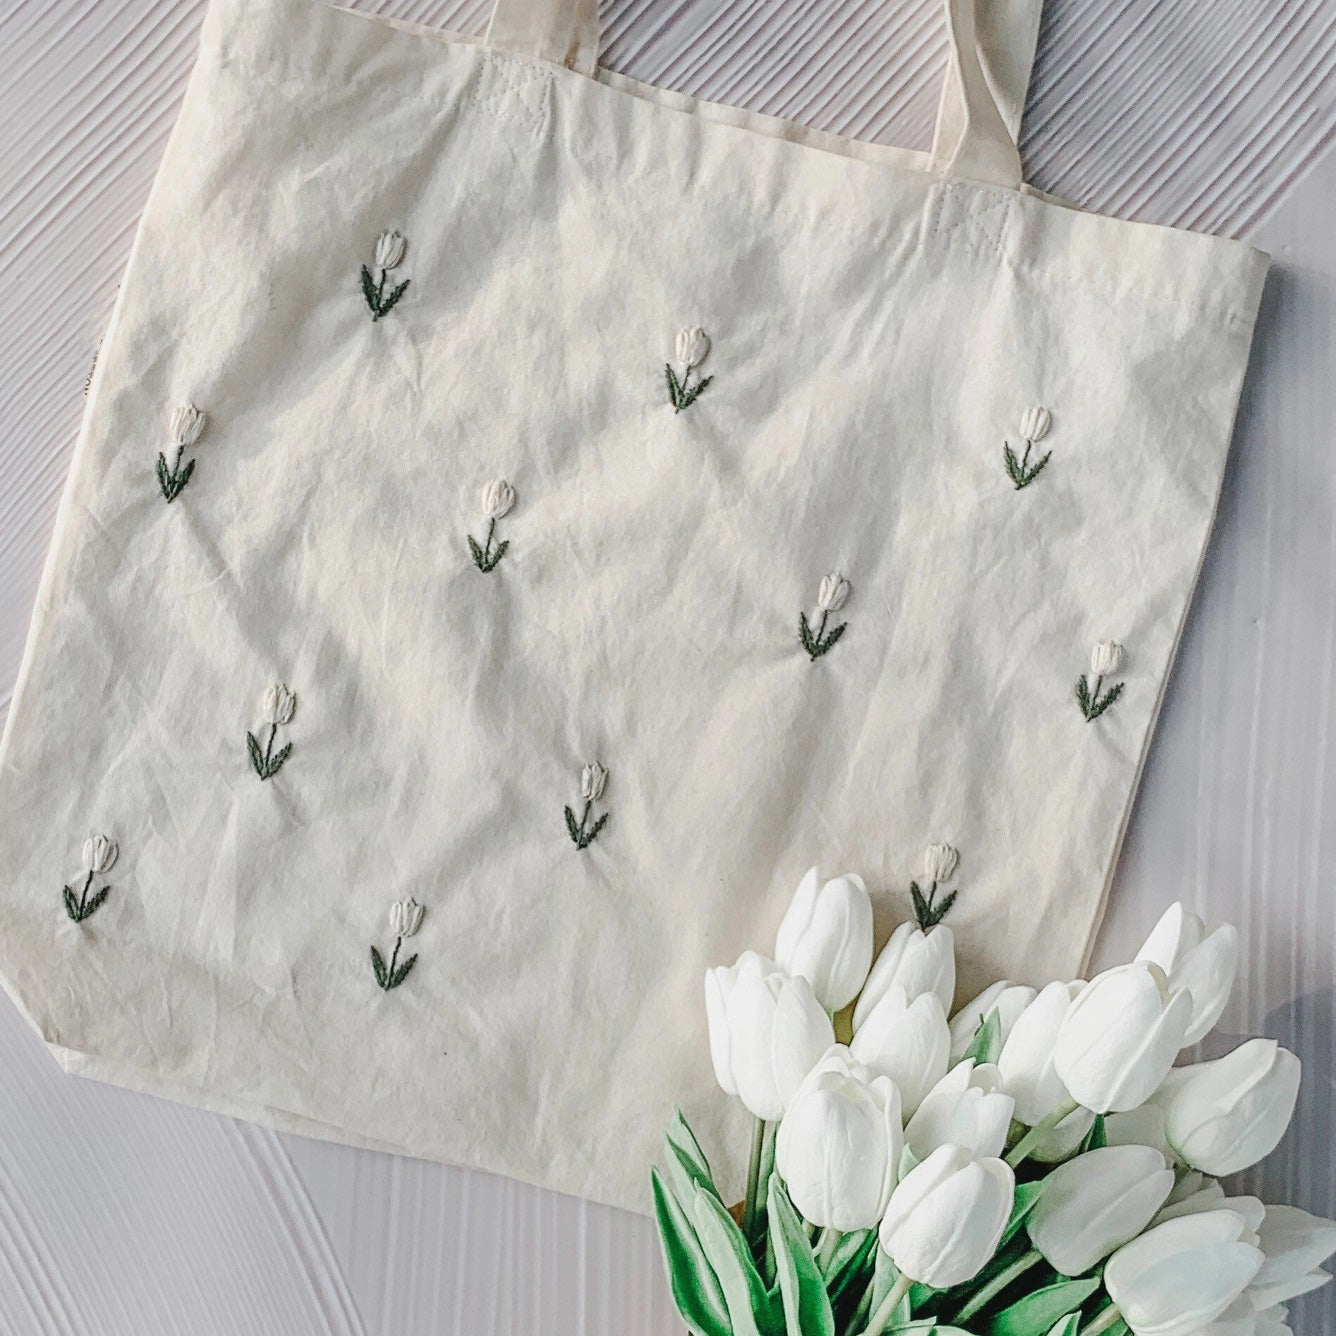 The Embroidered Tulip Tote Bag is perfect for groceries, shopping excursions or a day at the beach. Handmade White Embroidered tulips with dark green stems make this tote bag a charming option for daily use.100% cotton. Machine wash. Embroidered in the USA. 14.5 x 14.5in Tote bag with 10.5 in handles